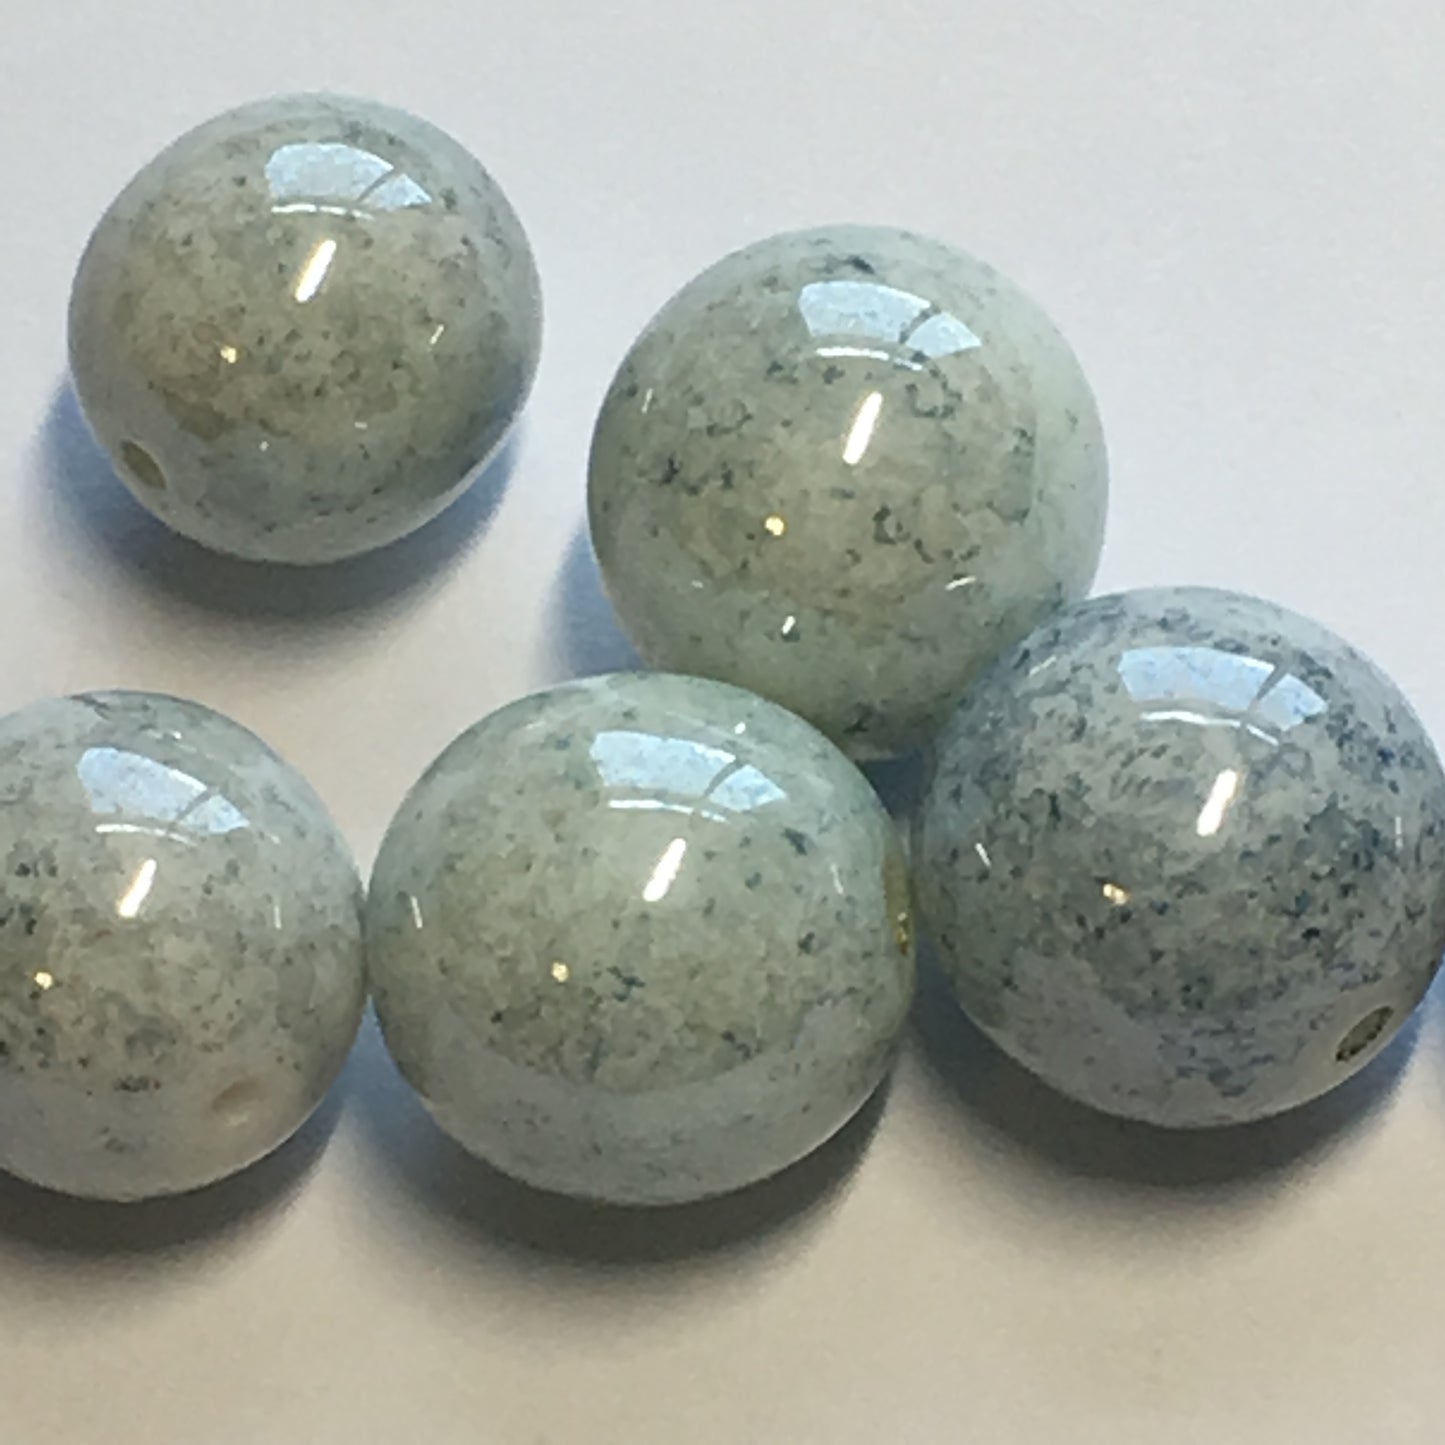 White Glass Round Beads with Blue Speckles, 10 and 11 mm, 7 Beads